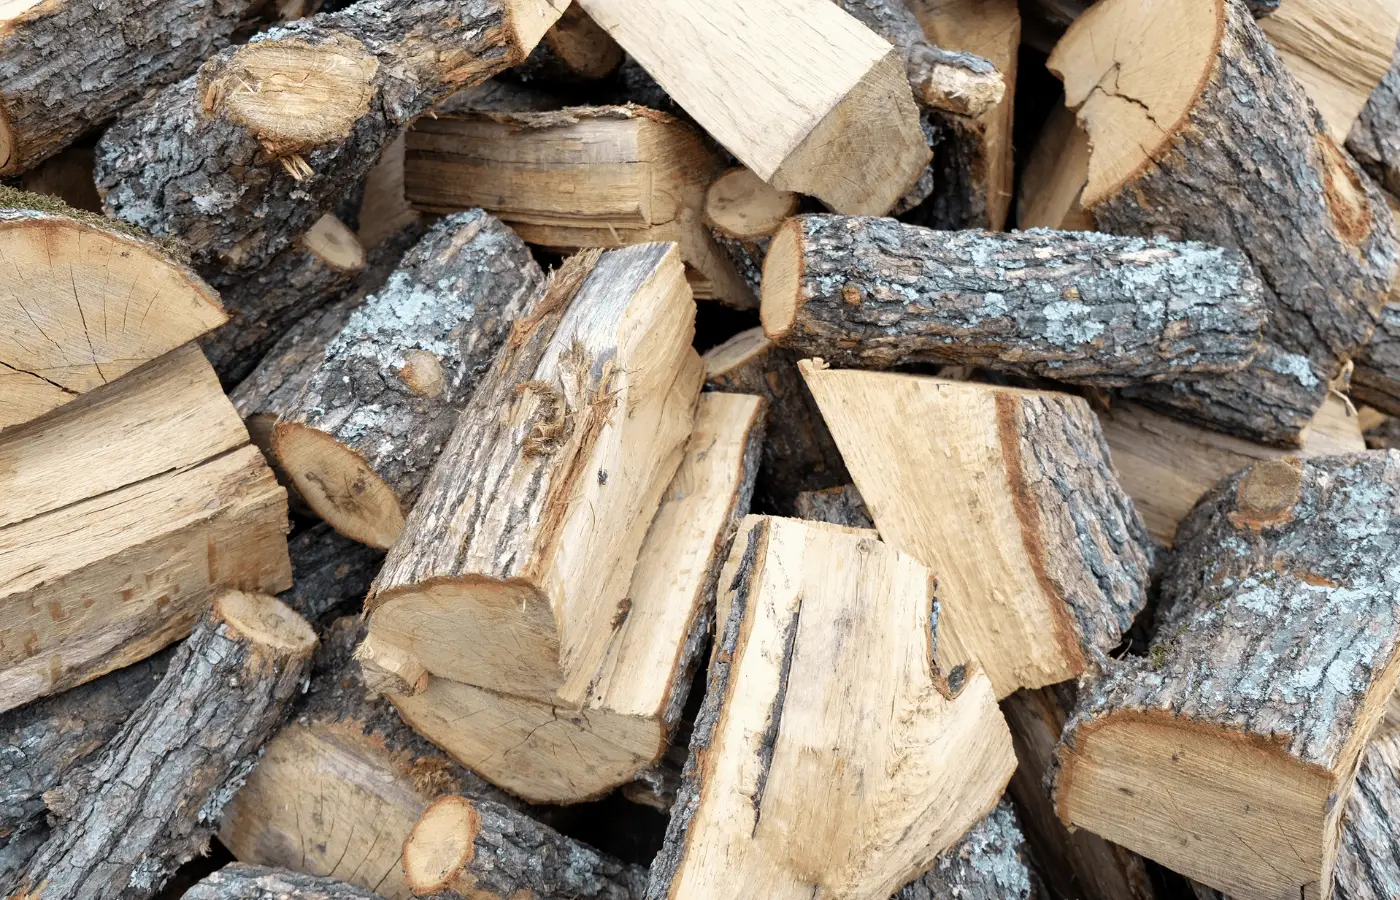 is ginkgo wood good for firewood